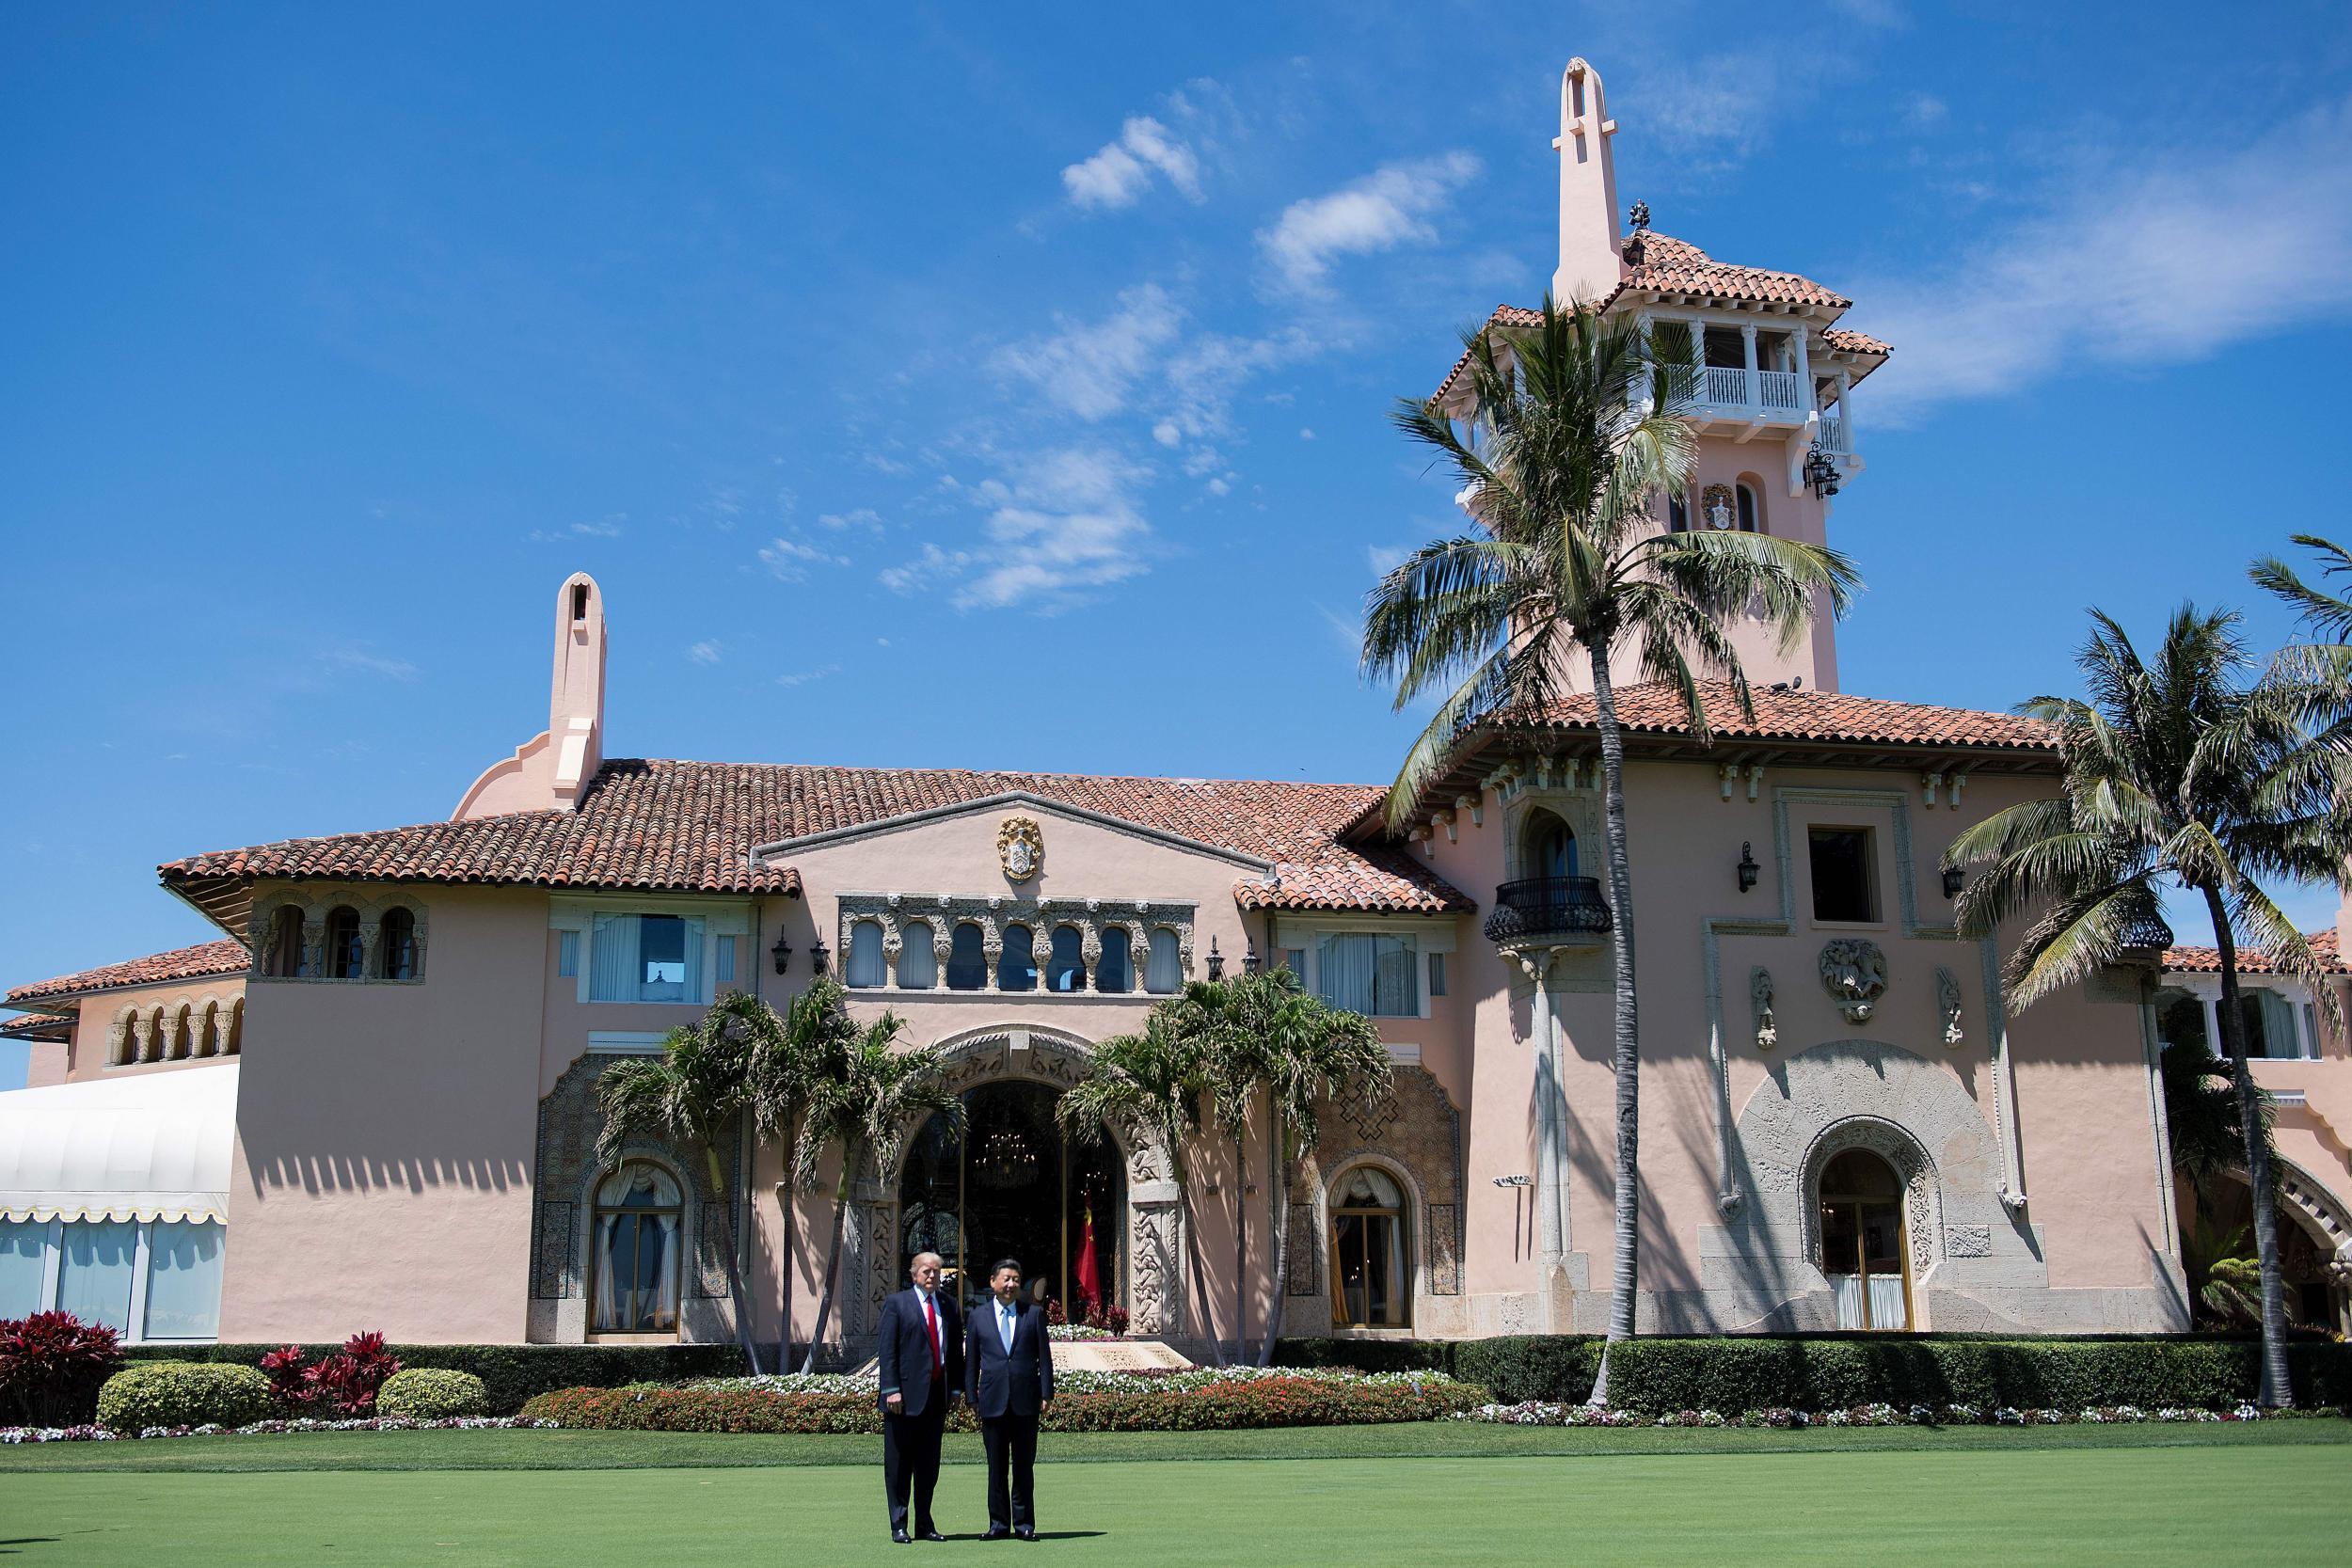 Donald Trump and Chinese President Xi Jinping pose together at the Mar-a-Lago estate in West Palm Beach, Florida